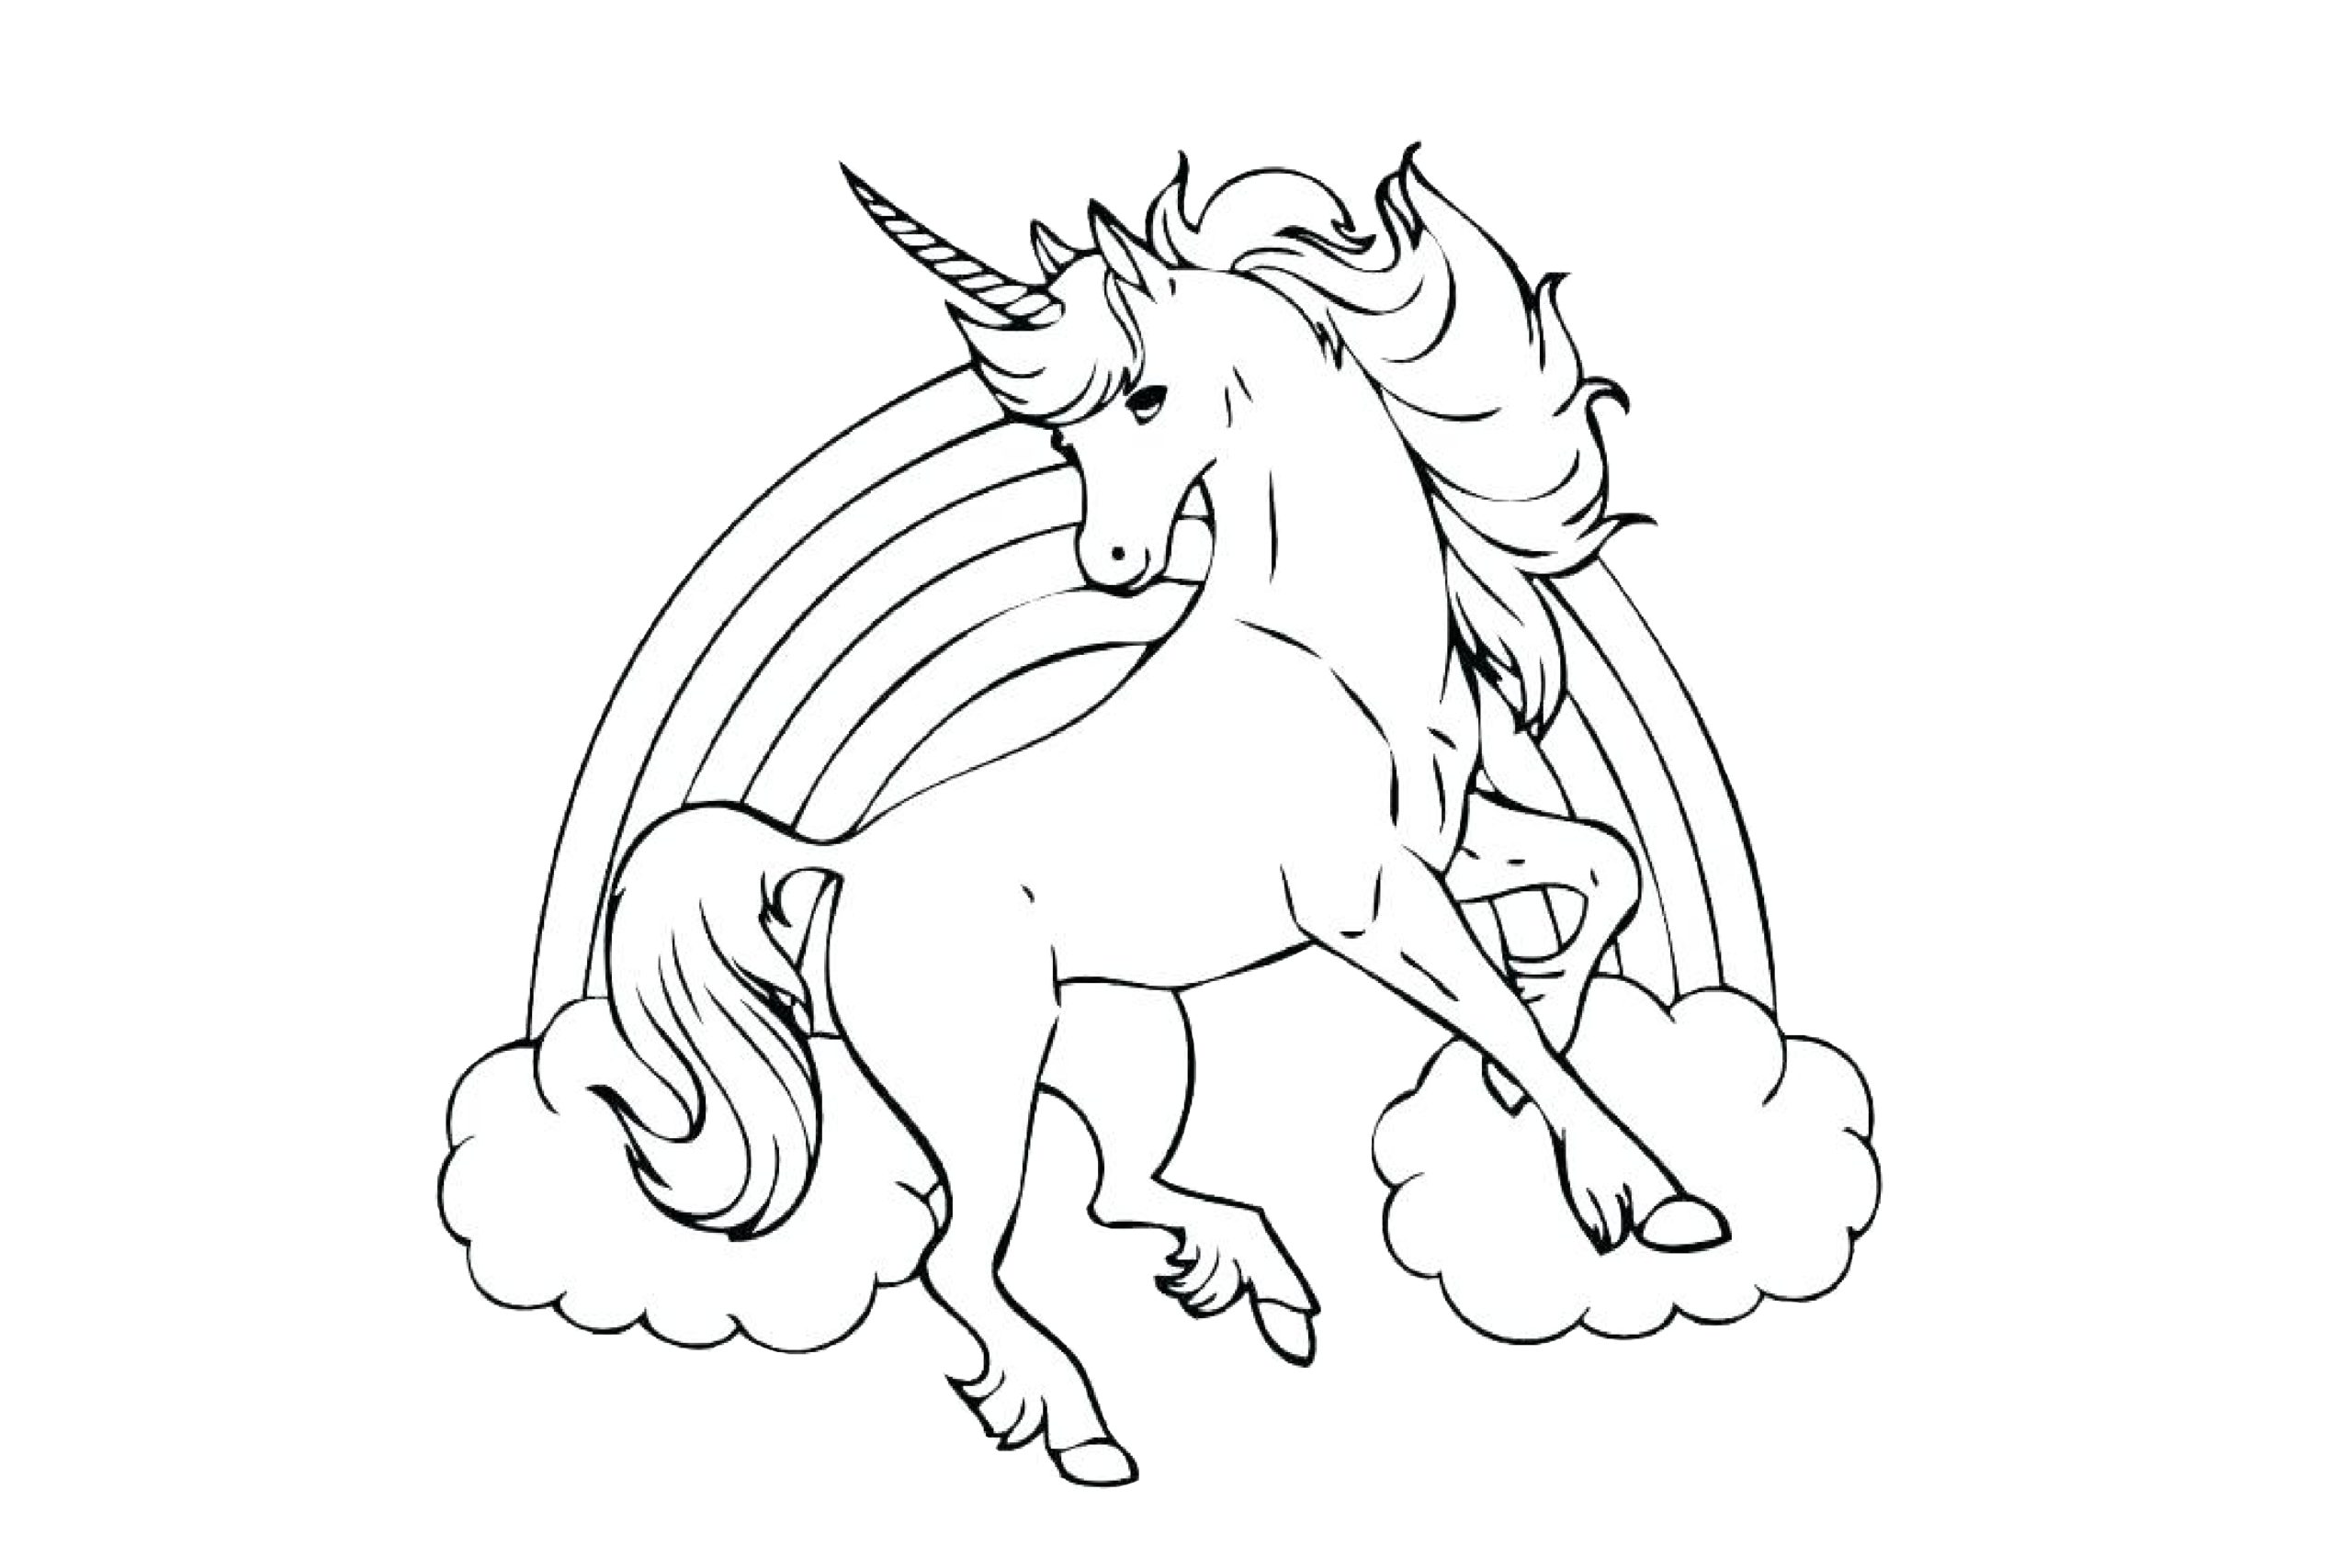 Coloring Pages : Coloring Idea Unicorn For Adults Princess Ideas ...